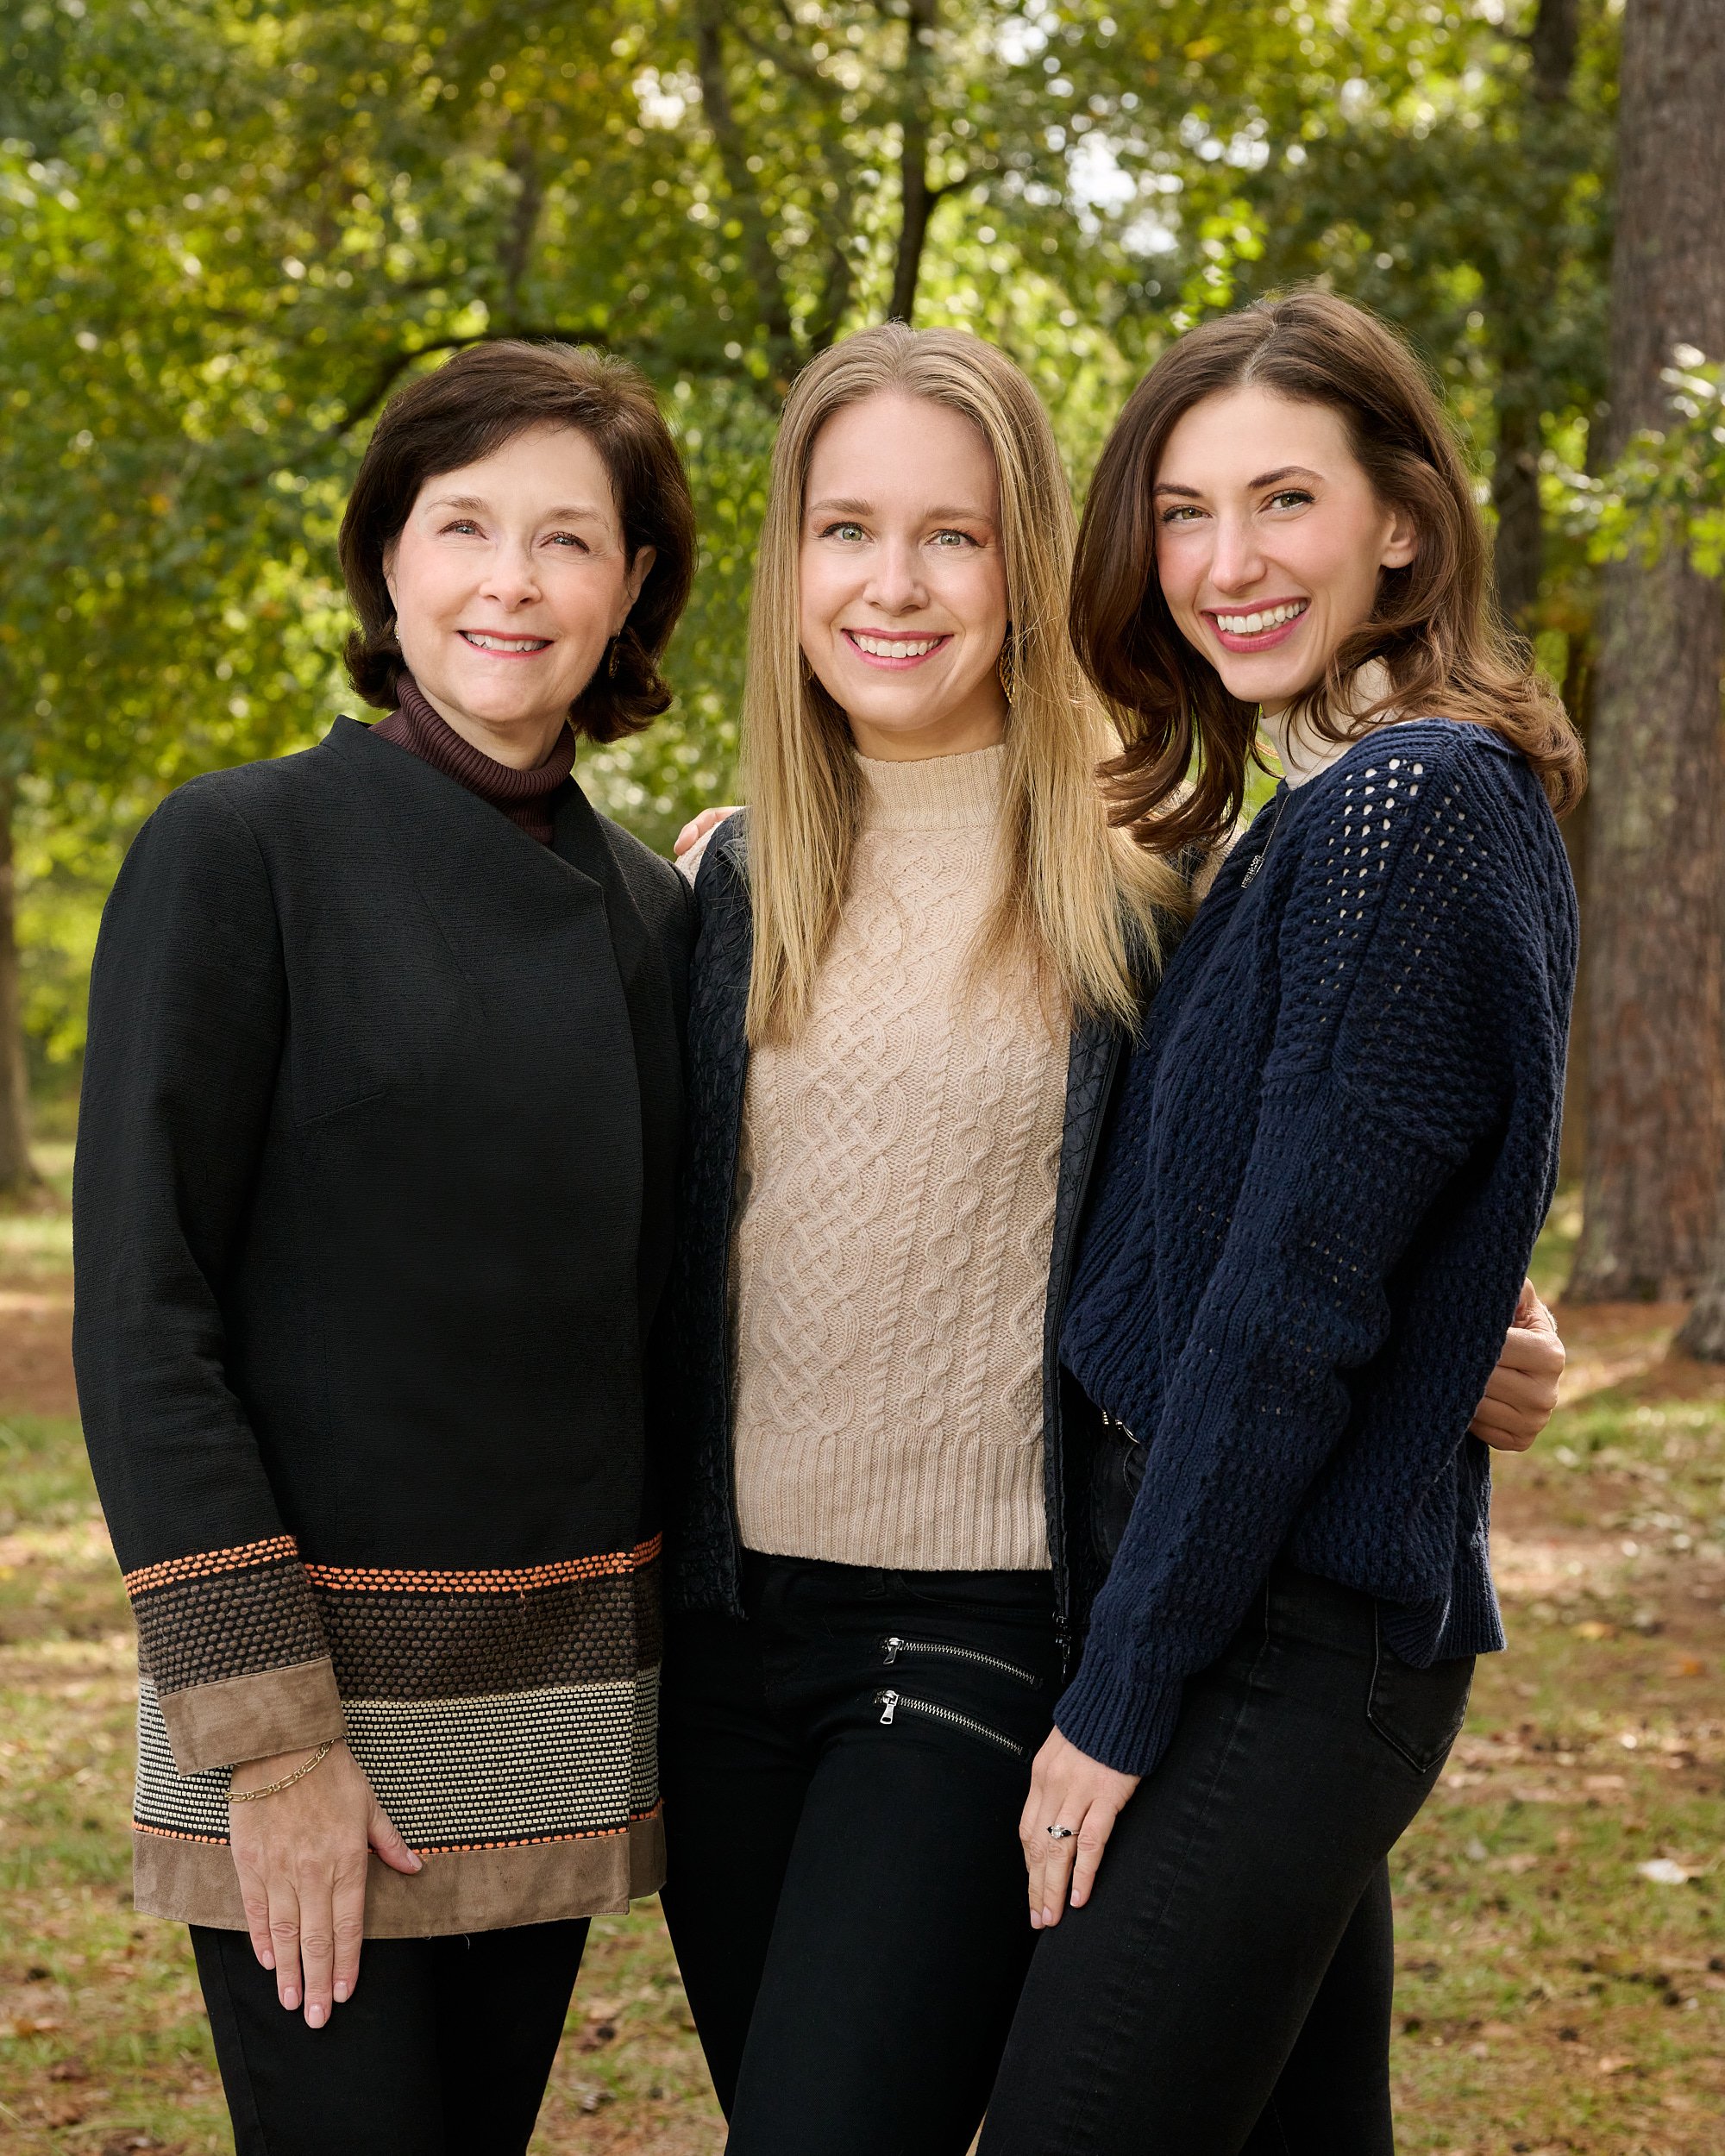  THE WOODLANDS, TEXAS - NOVEMBER 2022: Christmas mini session for Nancy Gatens and her family with Karina Eremina dba Joy of the Moment Photography in William Goodrich Jones state forest in Conroe, TX 